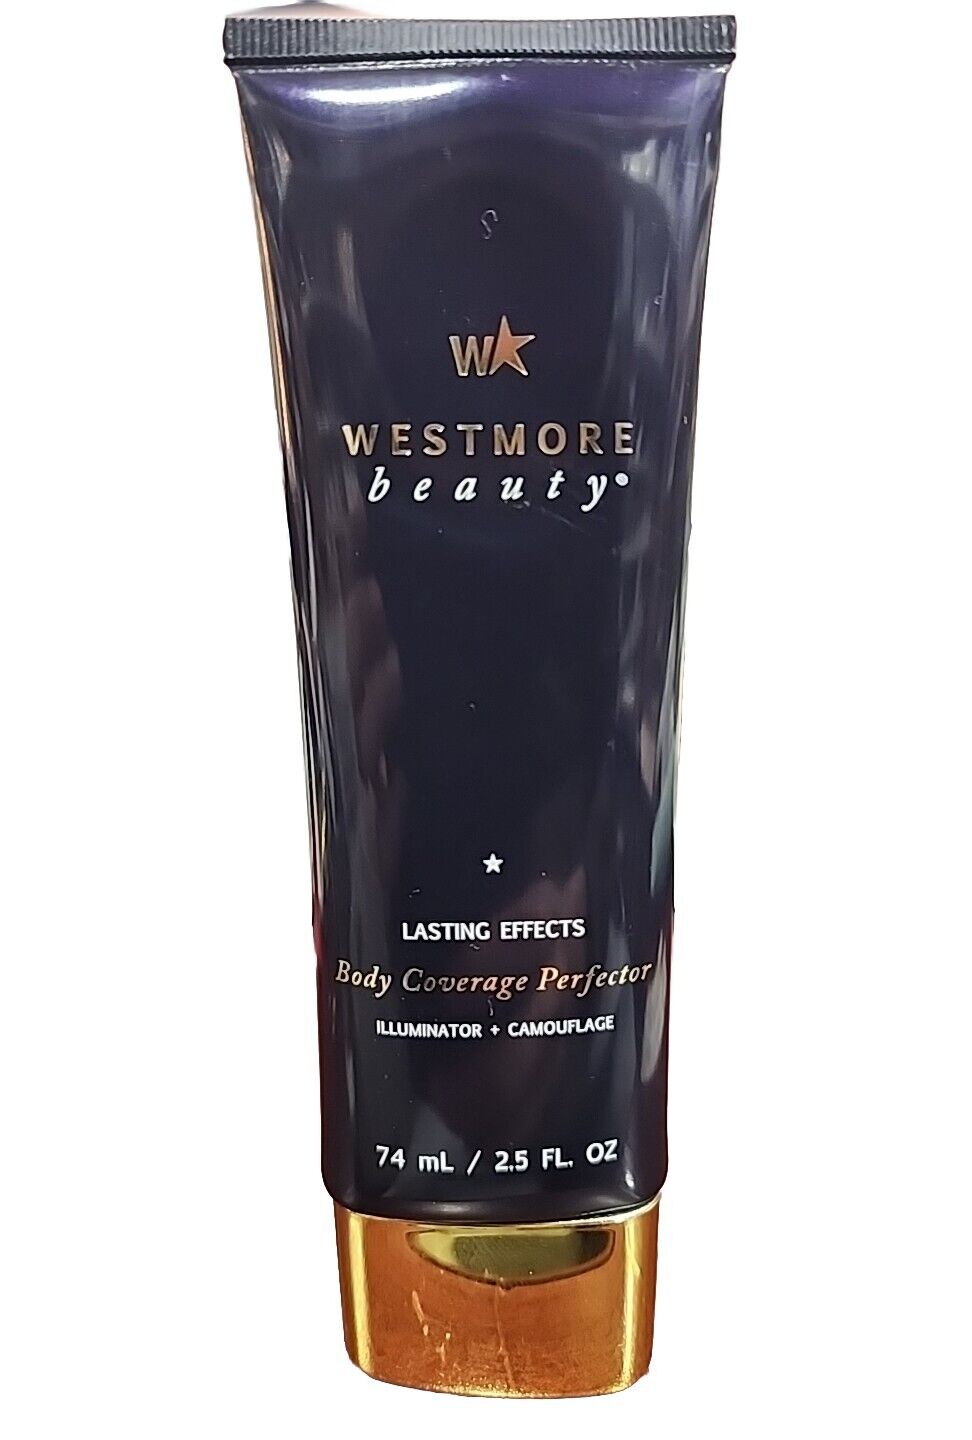 Westmore Beauty Body Coverage Perfector  74 mL 2.5 oz New Sealed (Choose Shade)